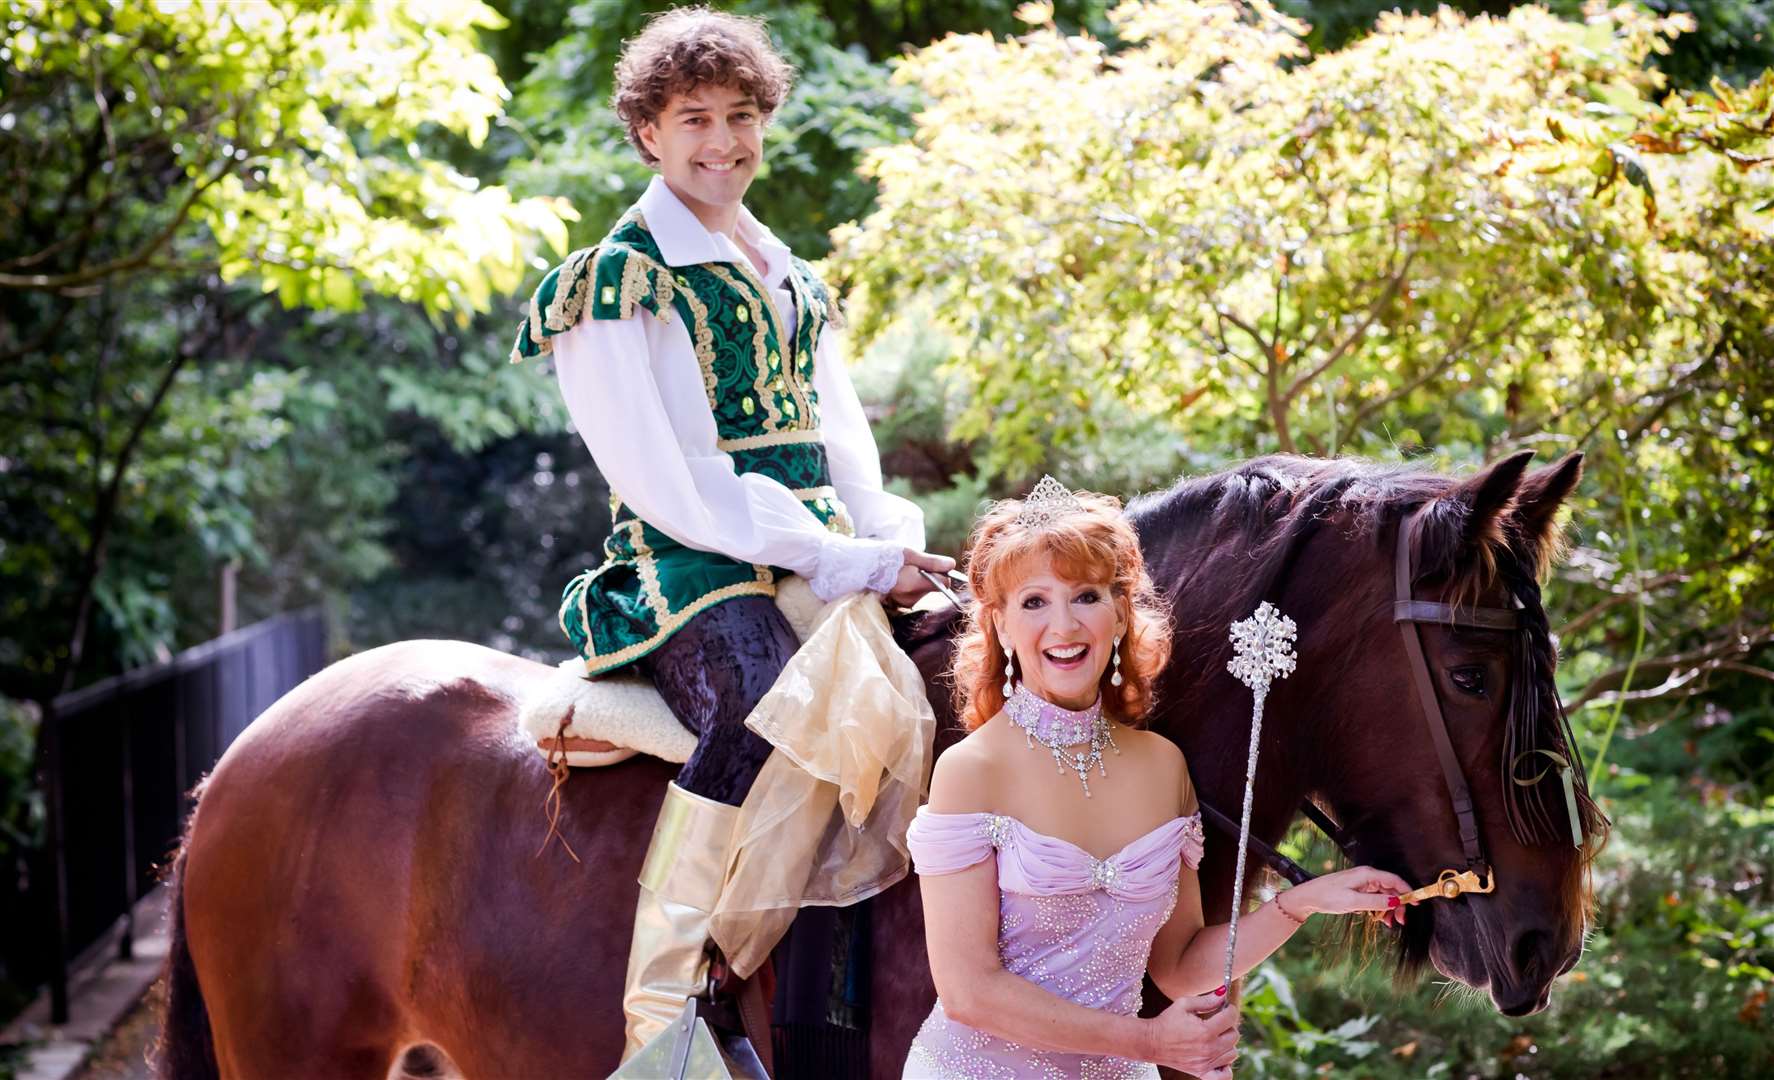 Lee Mead and Bonnie Langford at the launch of the Churchill Theatre's panto, Sleeping Beauty Picture: Kate Darkins